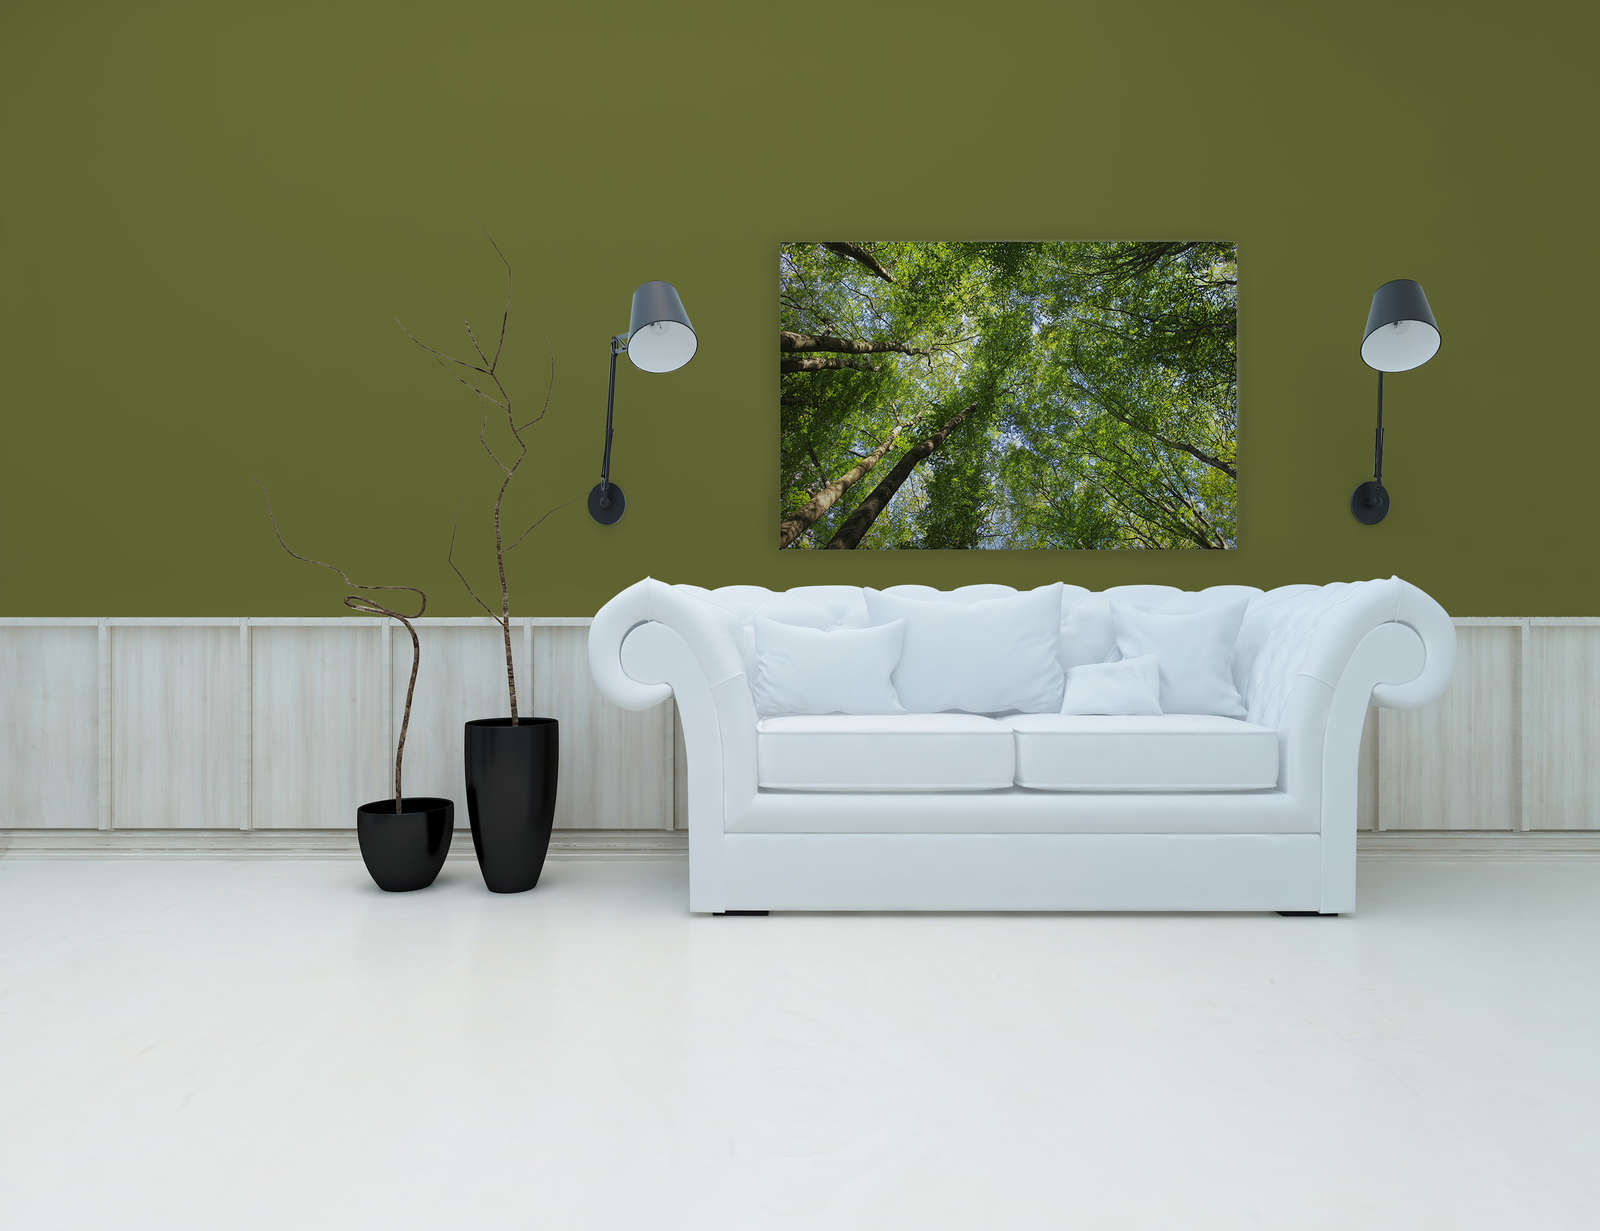             Foliage canvas picture with deciduous forest treetops - 1.20 m x 0.80 m
        